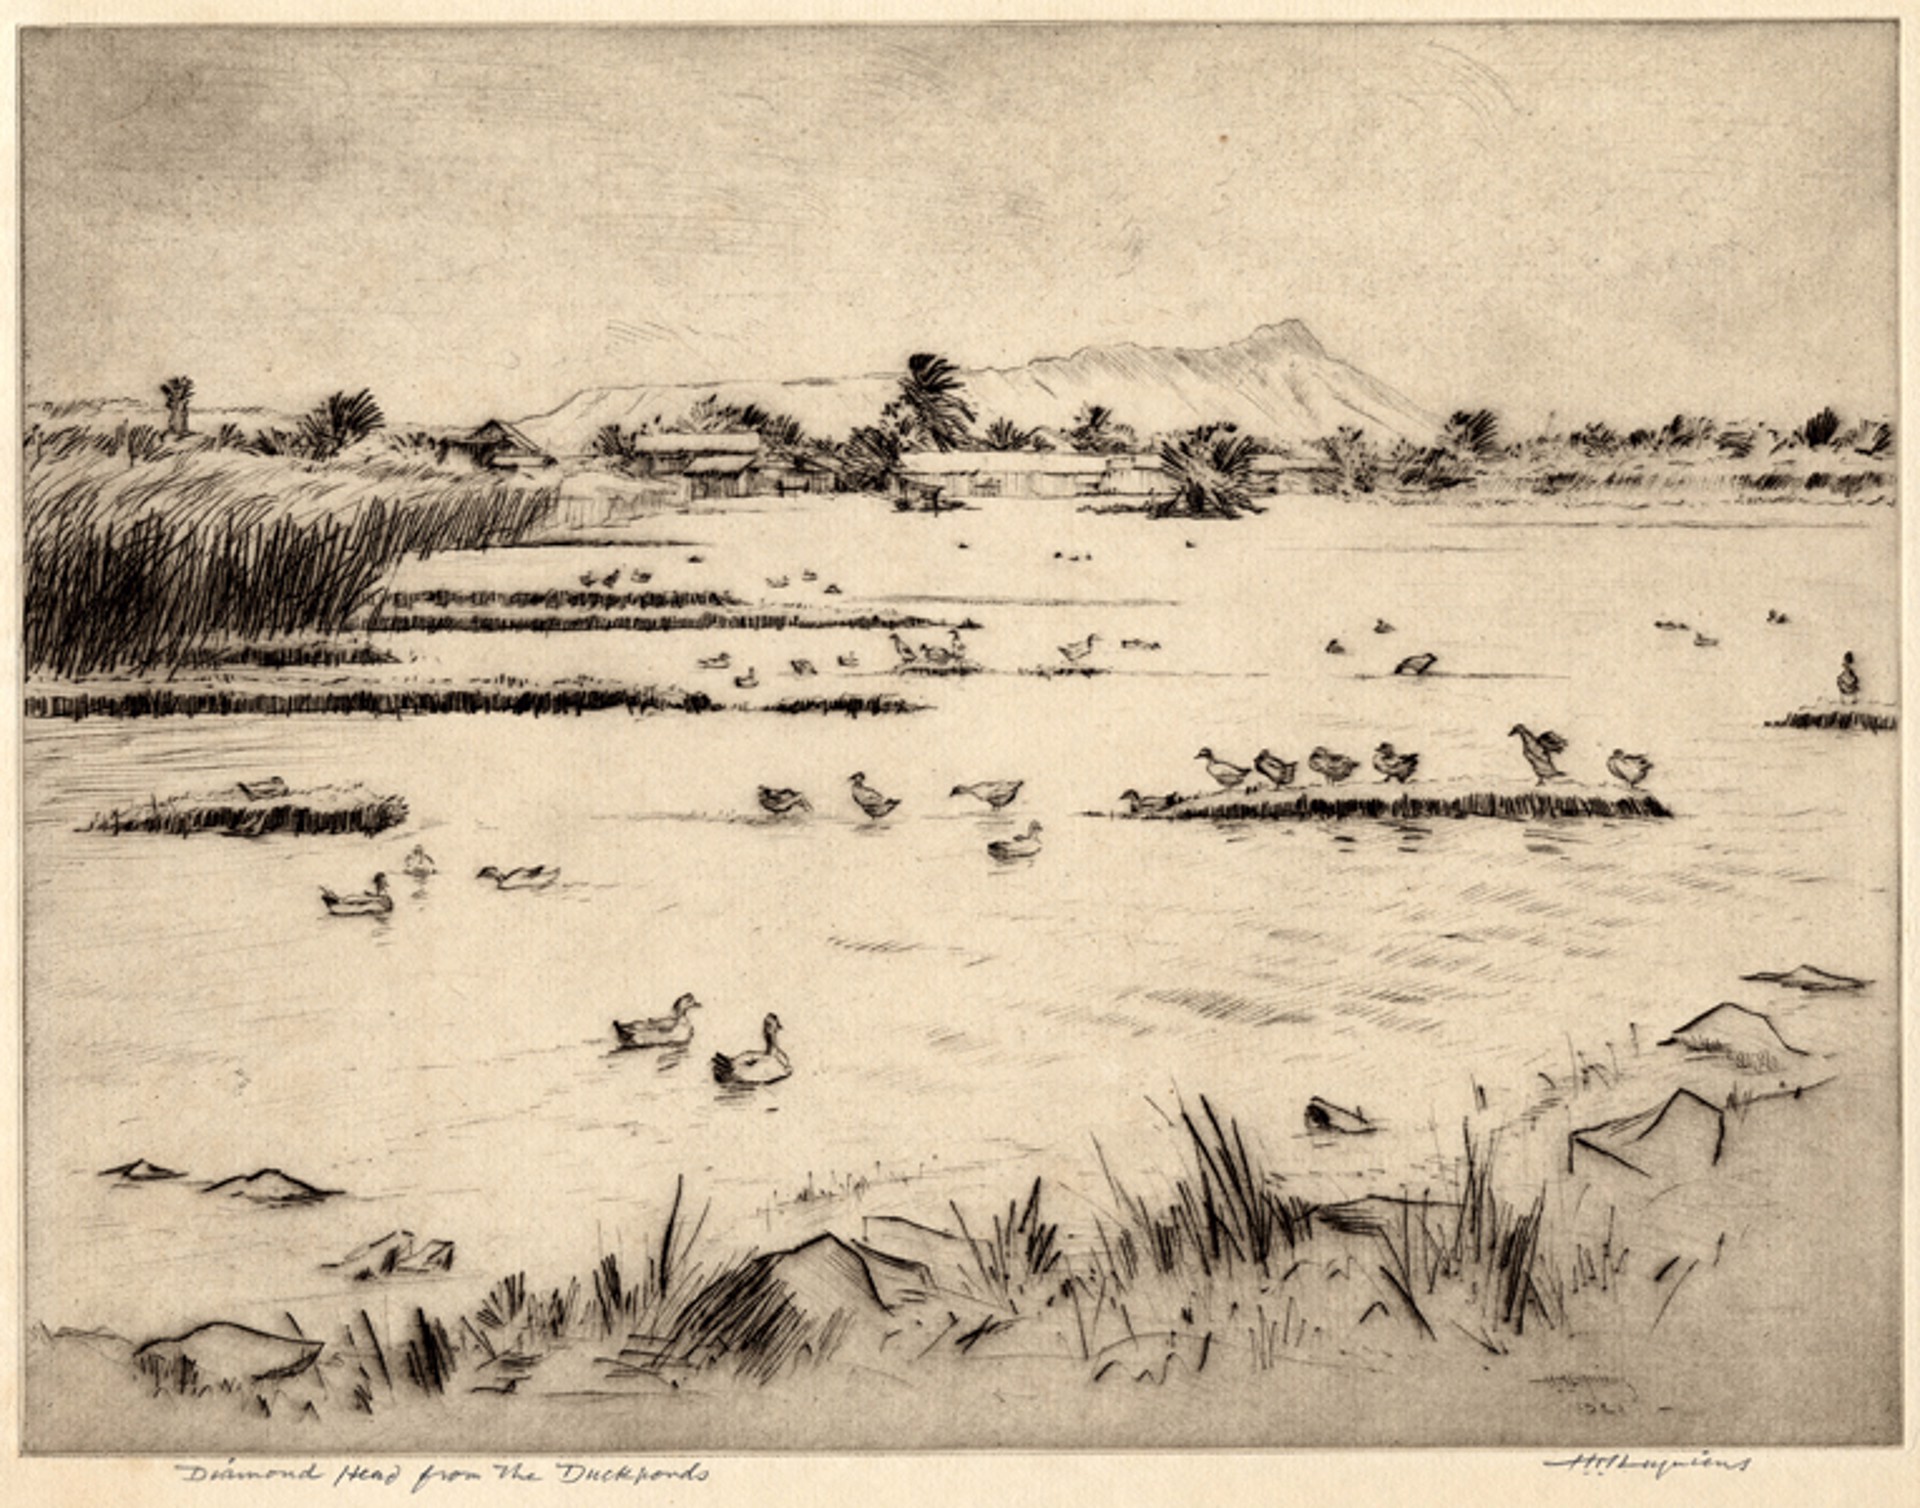 Diamond Head from the Duckponds by Huc Mazelet Luquiens